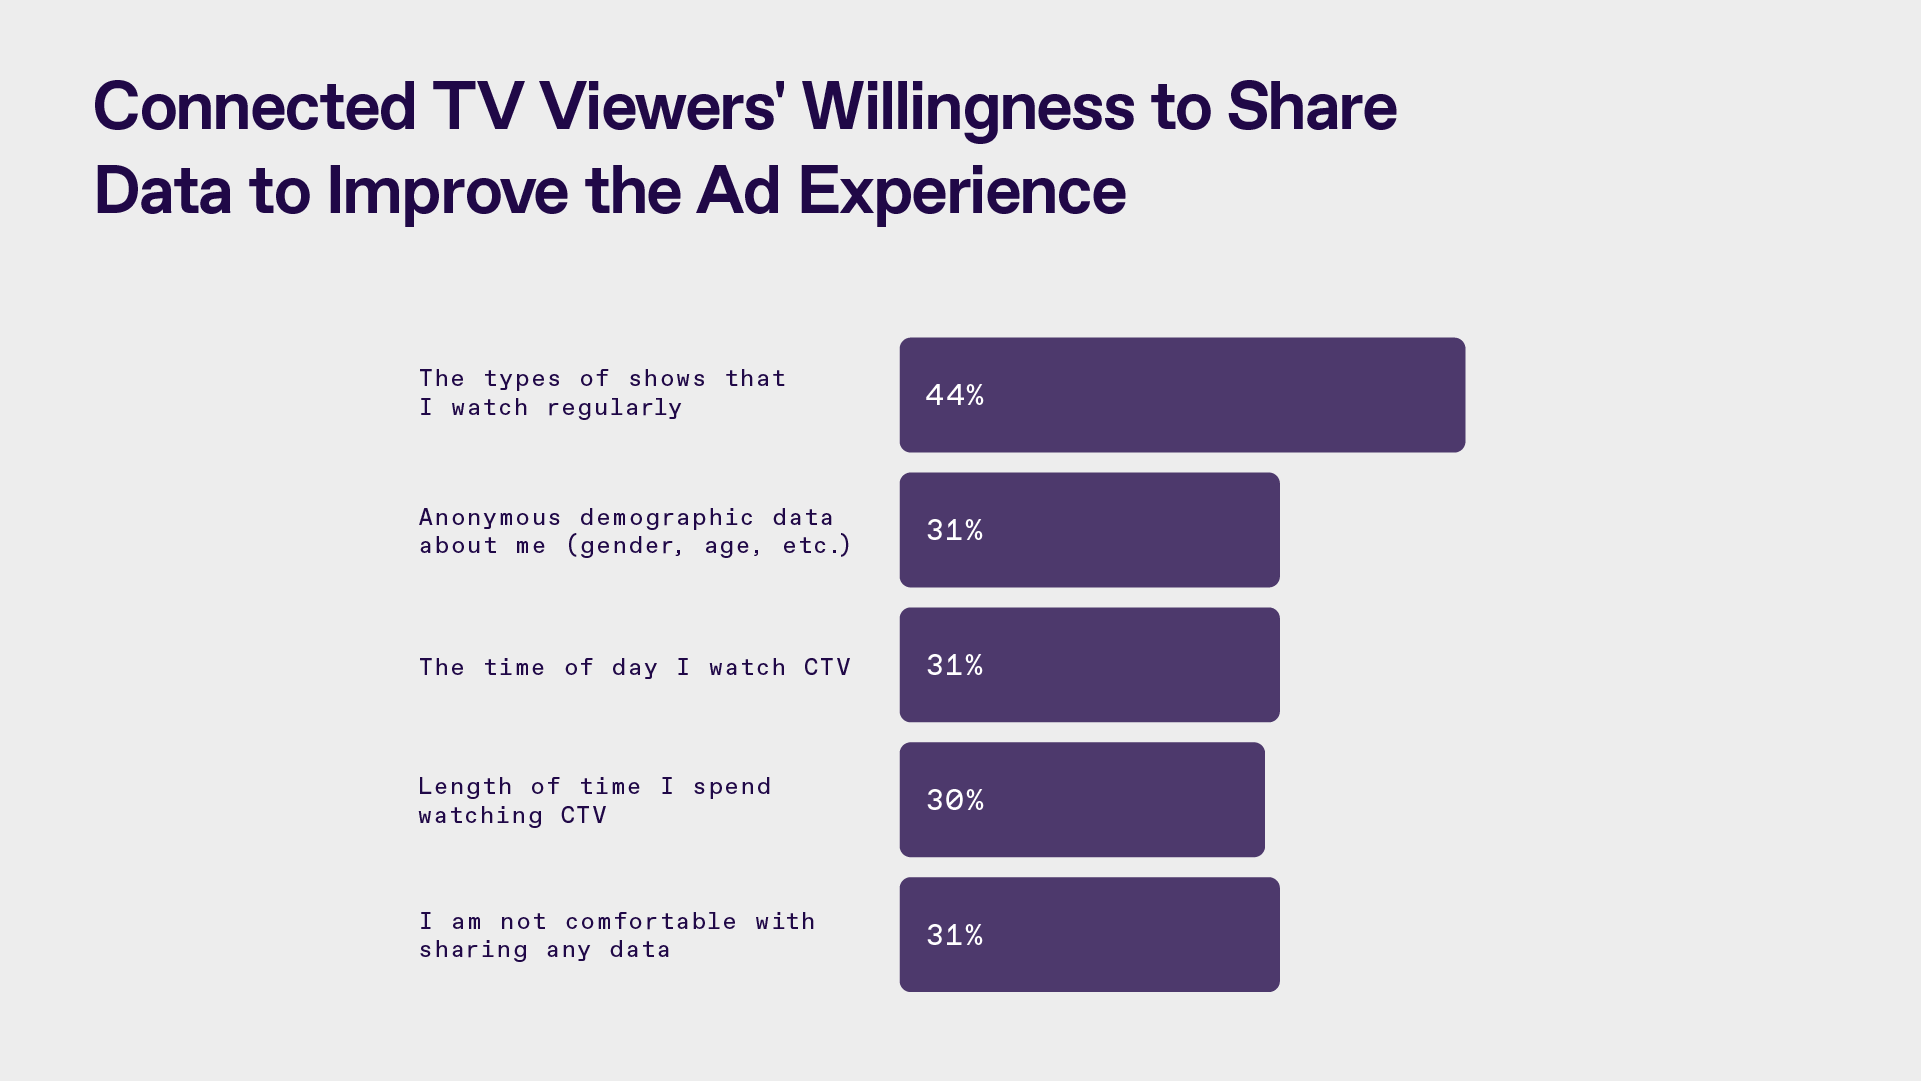 graph showing connected TV viewers' willingness to share data to improve the ad experience